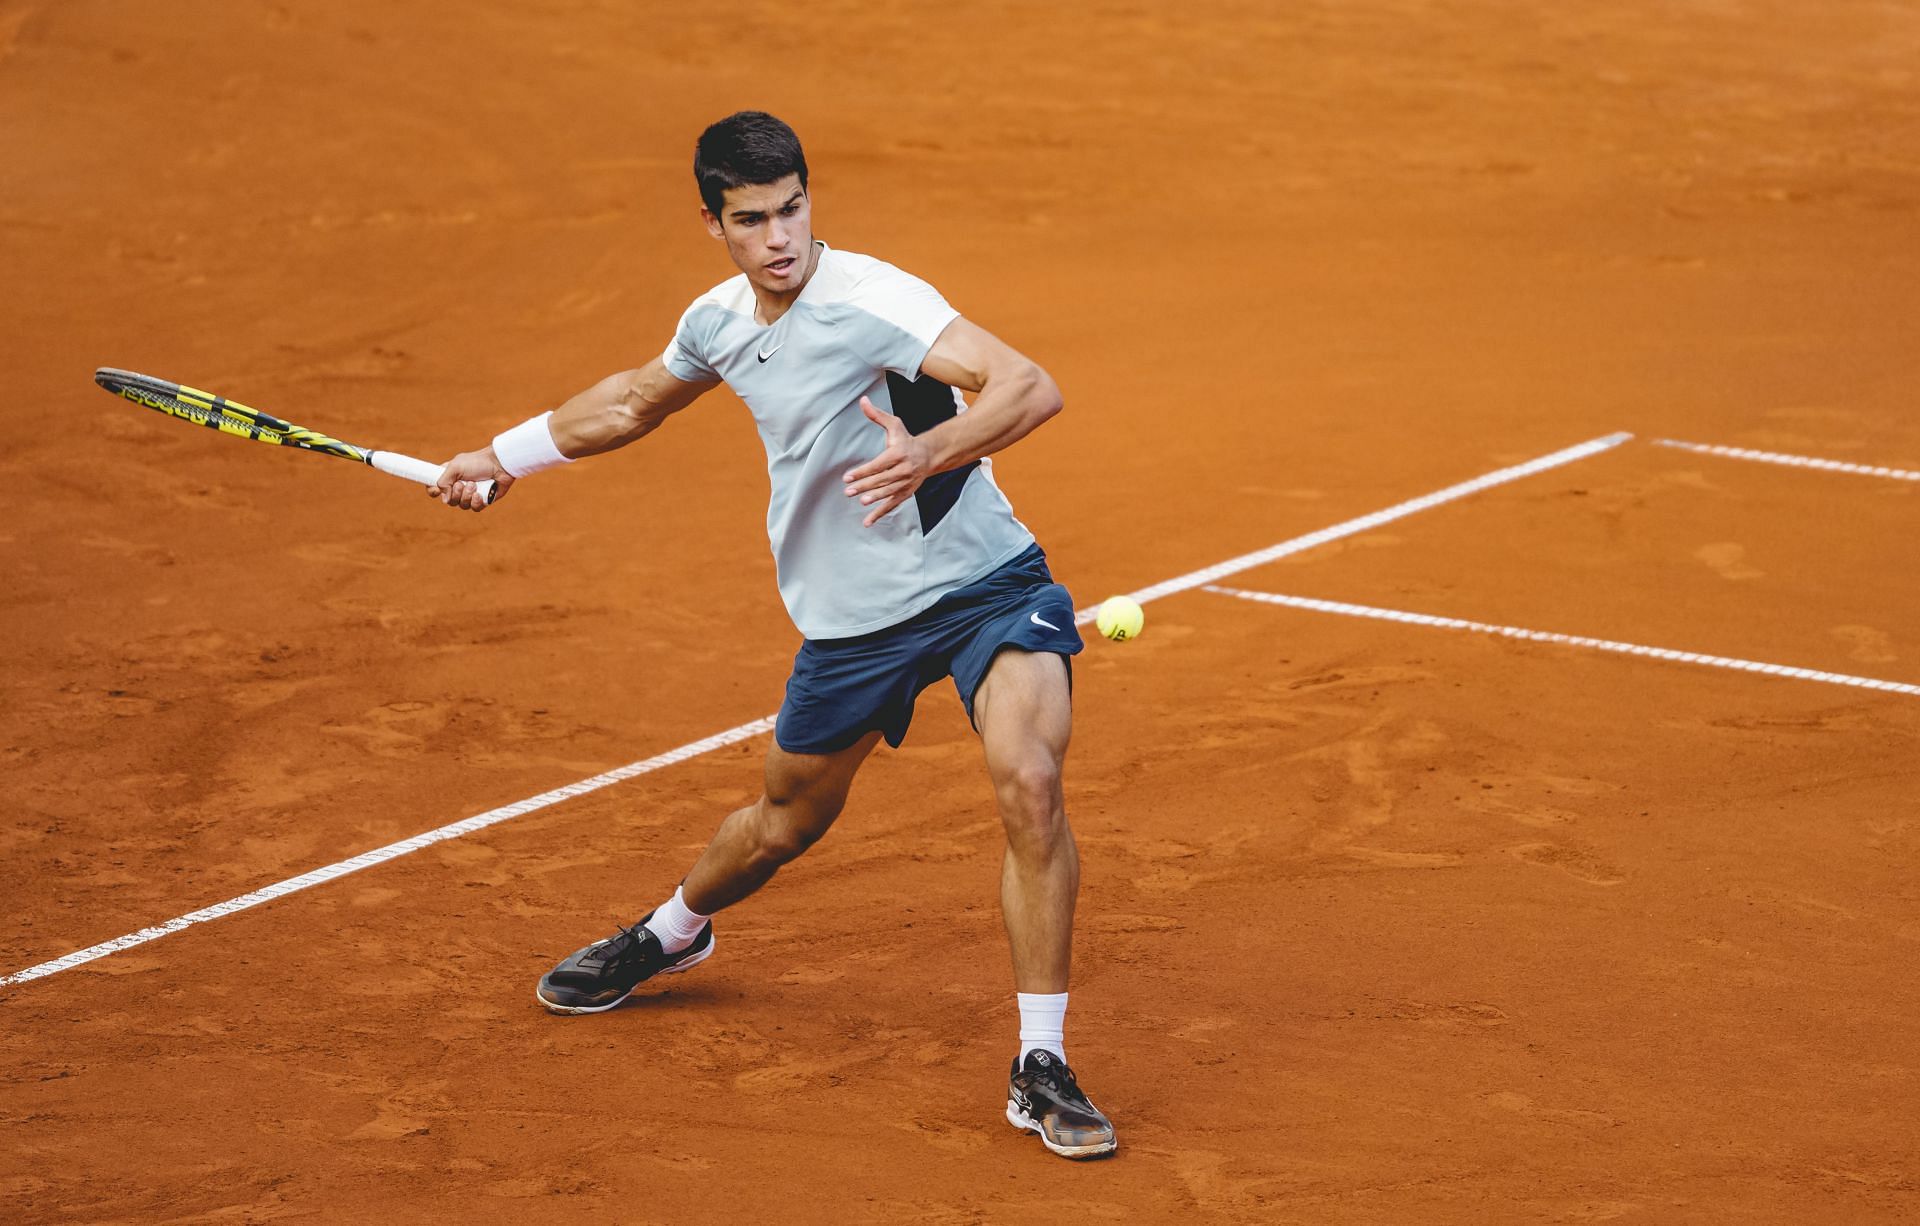 Carlos Alcaraz becomes the first player to reach the final of three ATP 500 tournaments before his 20th birthday